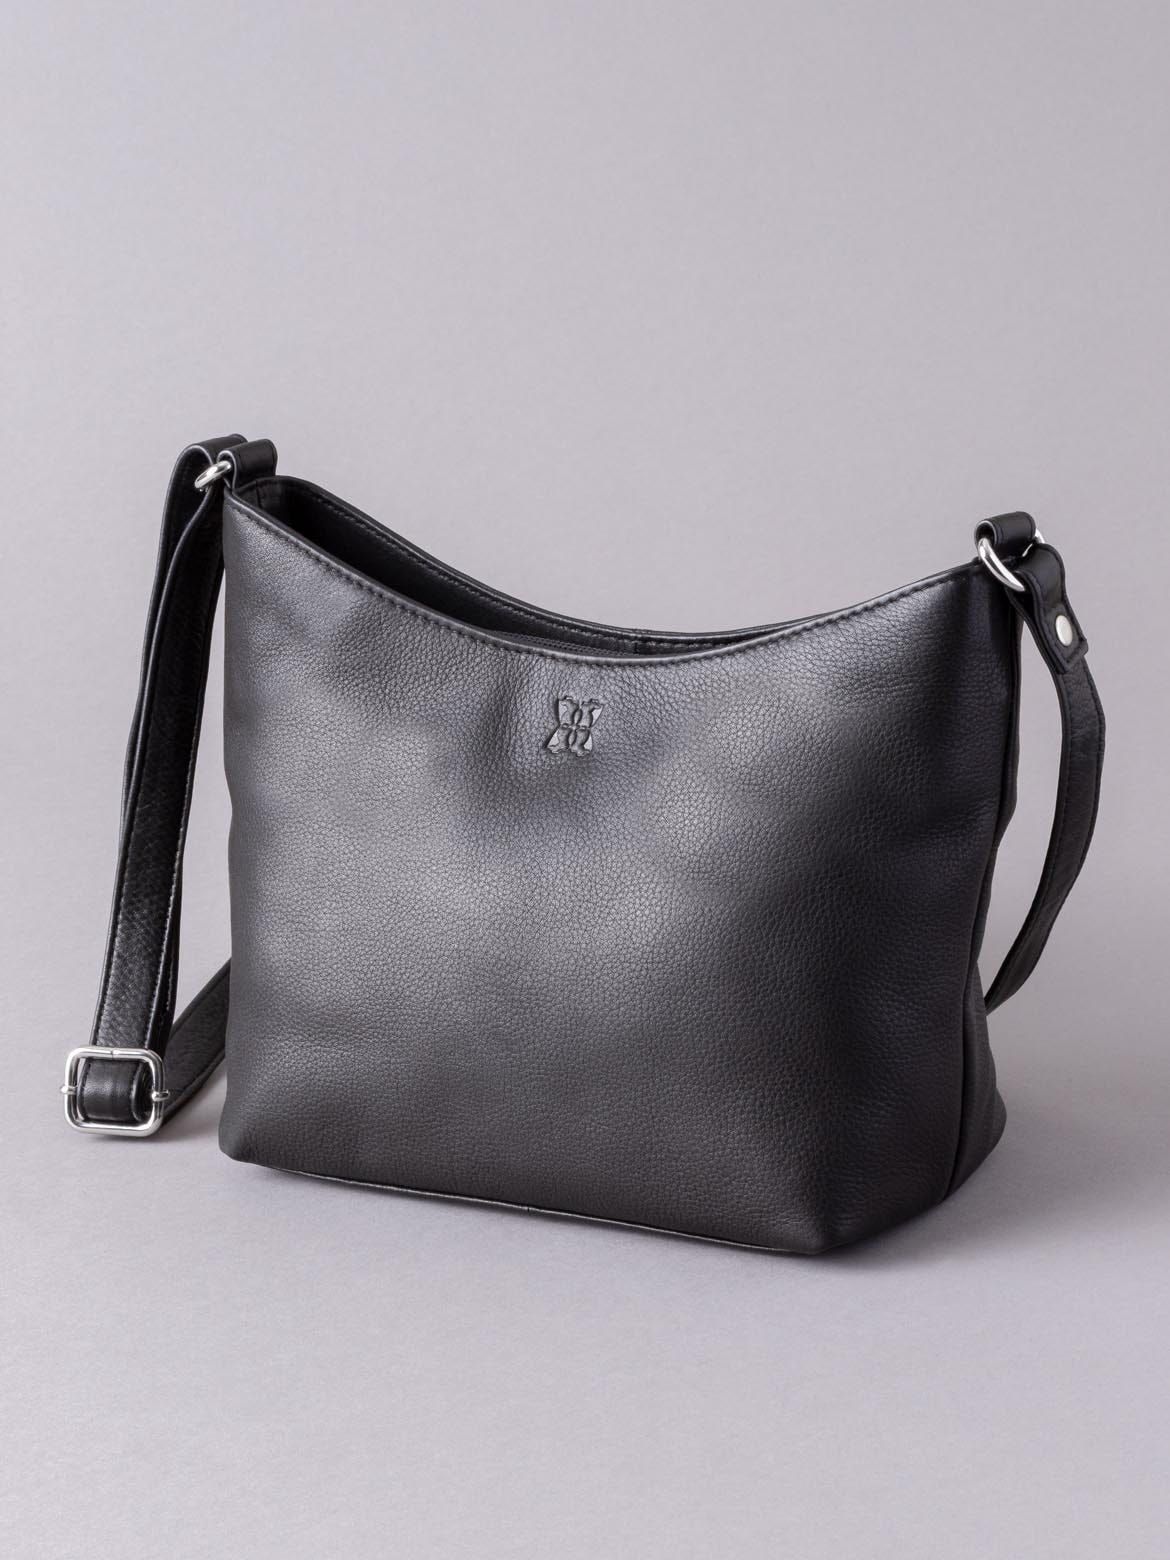 The Fornside is the perfect black cross body bag, crafted from luxuriously soft leather, its minimalist design makes it easy to coordinate with any outfit. A small handbag, it works as a traditional cross body bag, yet the adjustable strap allows it to be carried as a compact shoulder bag, when the occasion requires. Not only does the Fornside handbag look great, it feels fantastic, thanks to our real leather that showcases the natural patina. And practicality is key... we've included a rear zip pocket, and the inside is carefully sectioned, with a zip-top main compartment in the middle, plus two additional sections secured with magnetic studs.